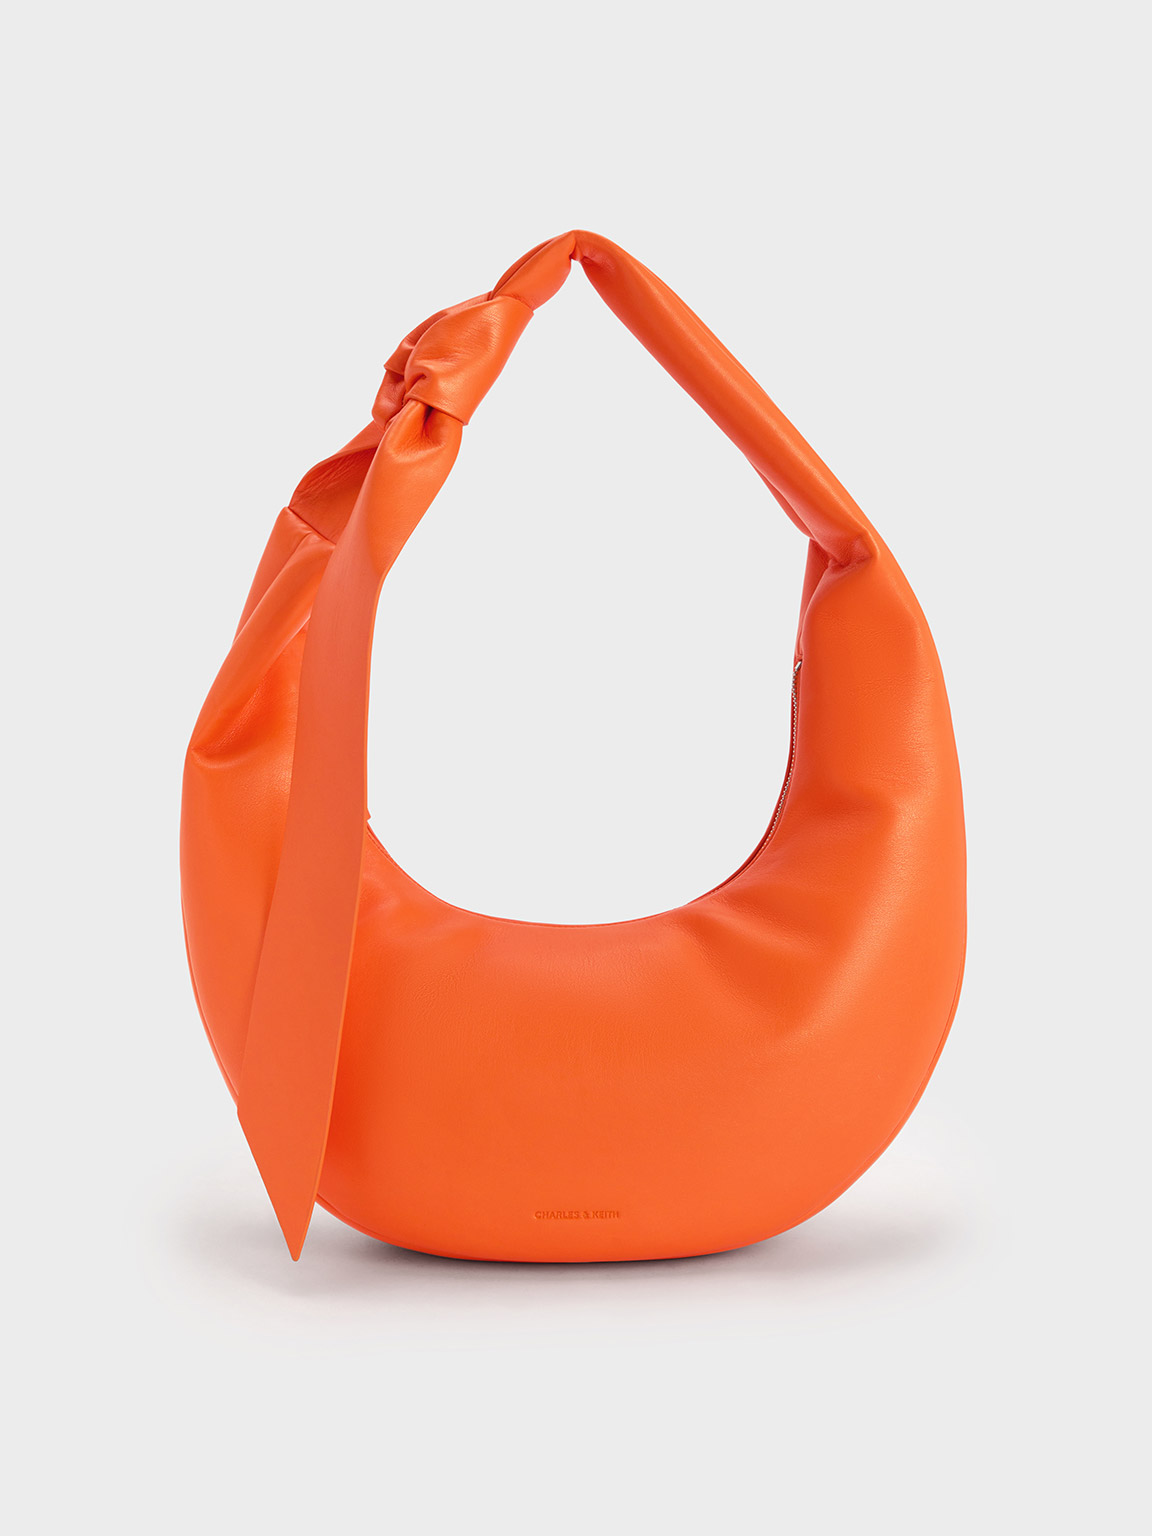 Charles & Keith Toni Knotted Curved Hobo Bag In Orange